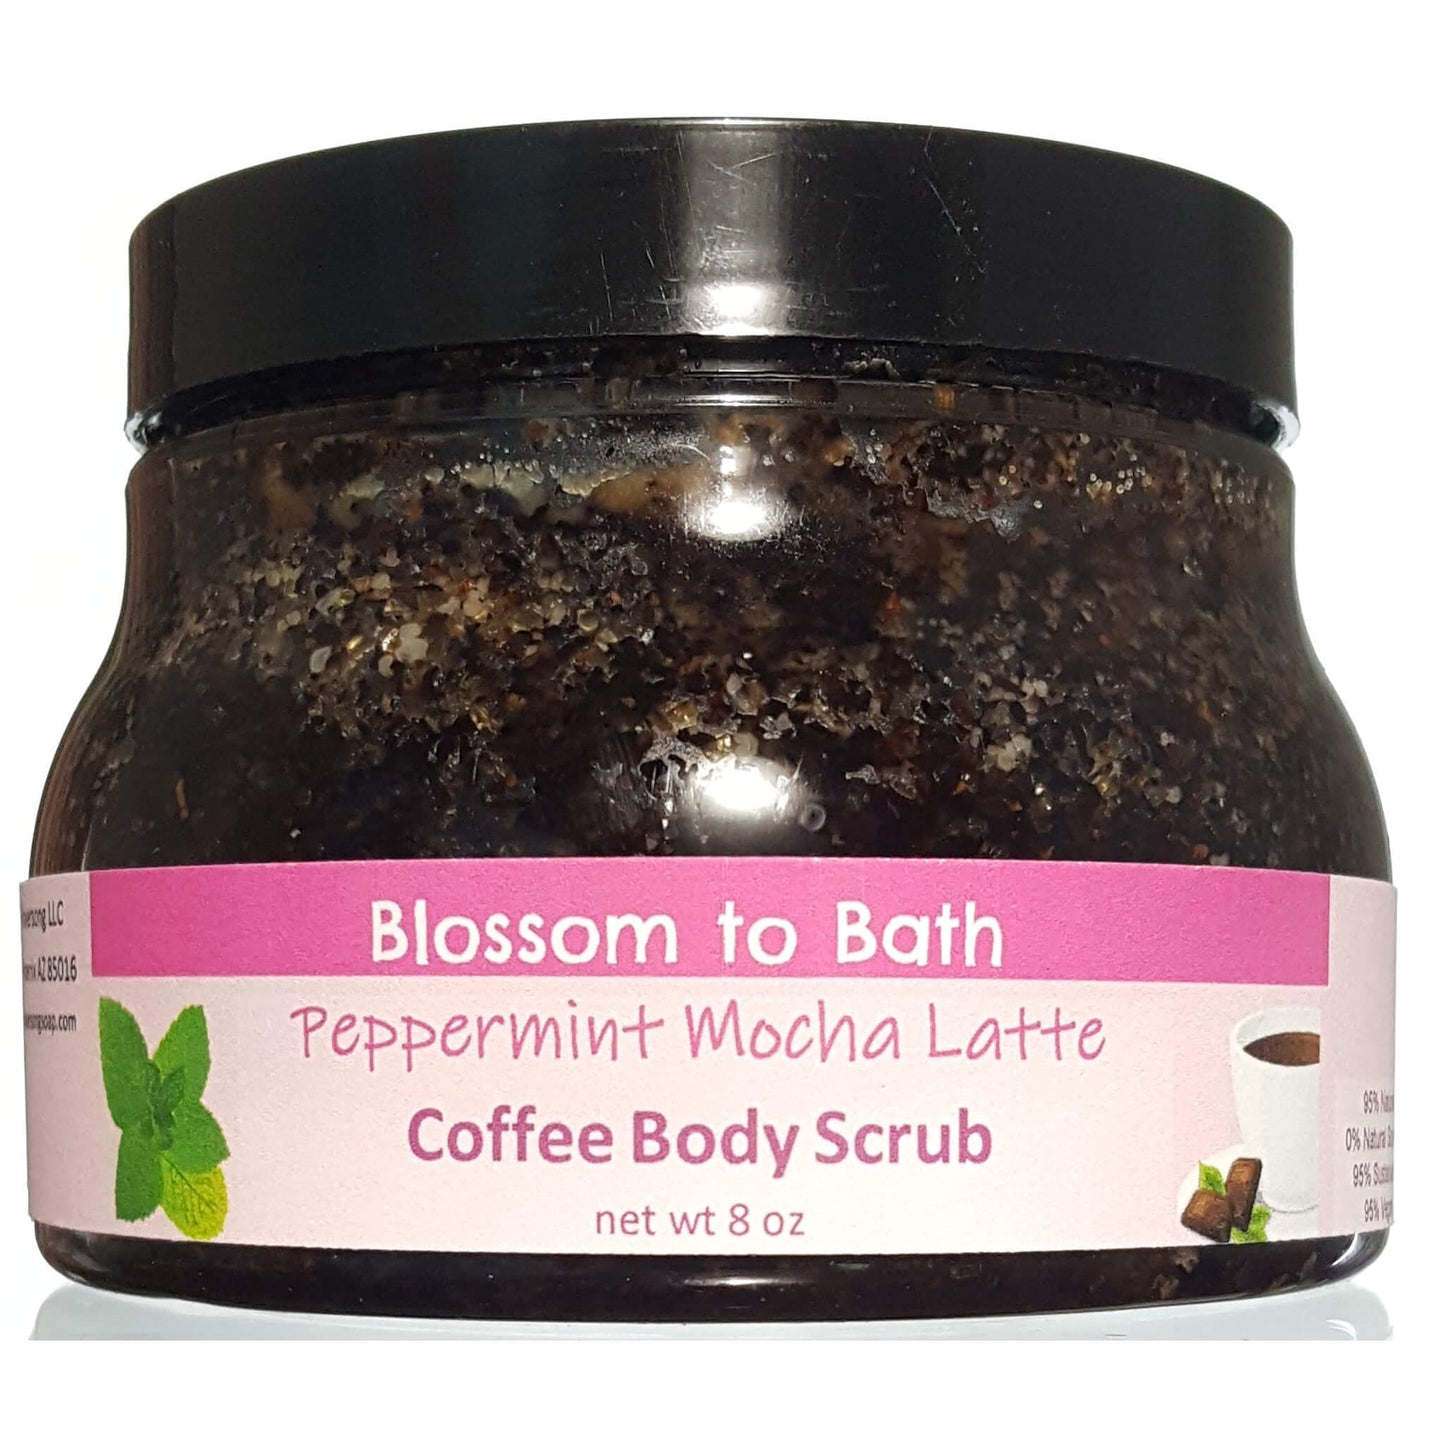 Buy Blossom to Bath Peppermint Mocha Latte Coffee Body Scrub from Flowersong Soap Studio.  Polish skin to a refreshed natural glow while enjoying your favorite mouth-watering gourmet coffee aroma  A confectionary blend of fresh mint, rich fudge, and coffee.